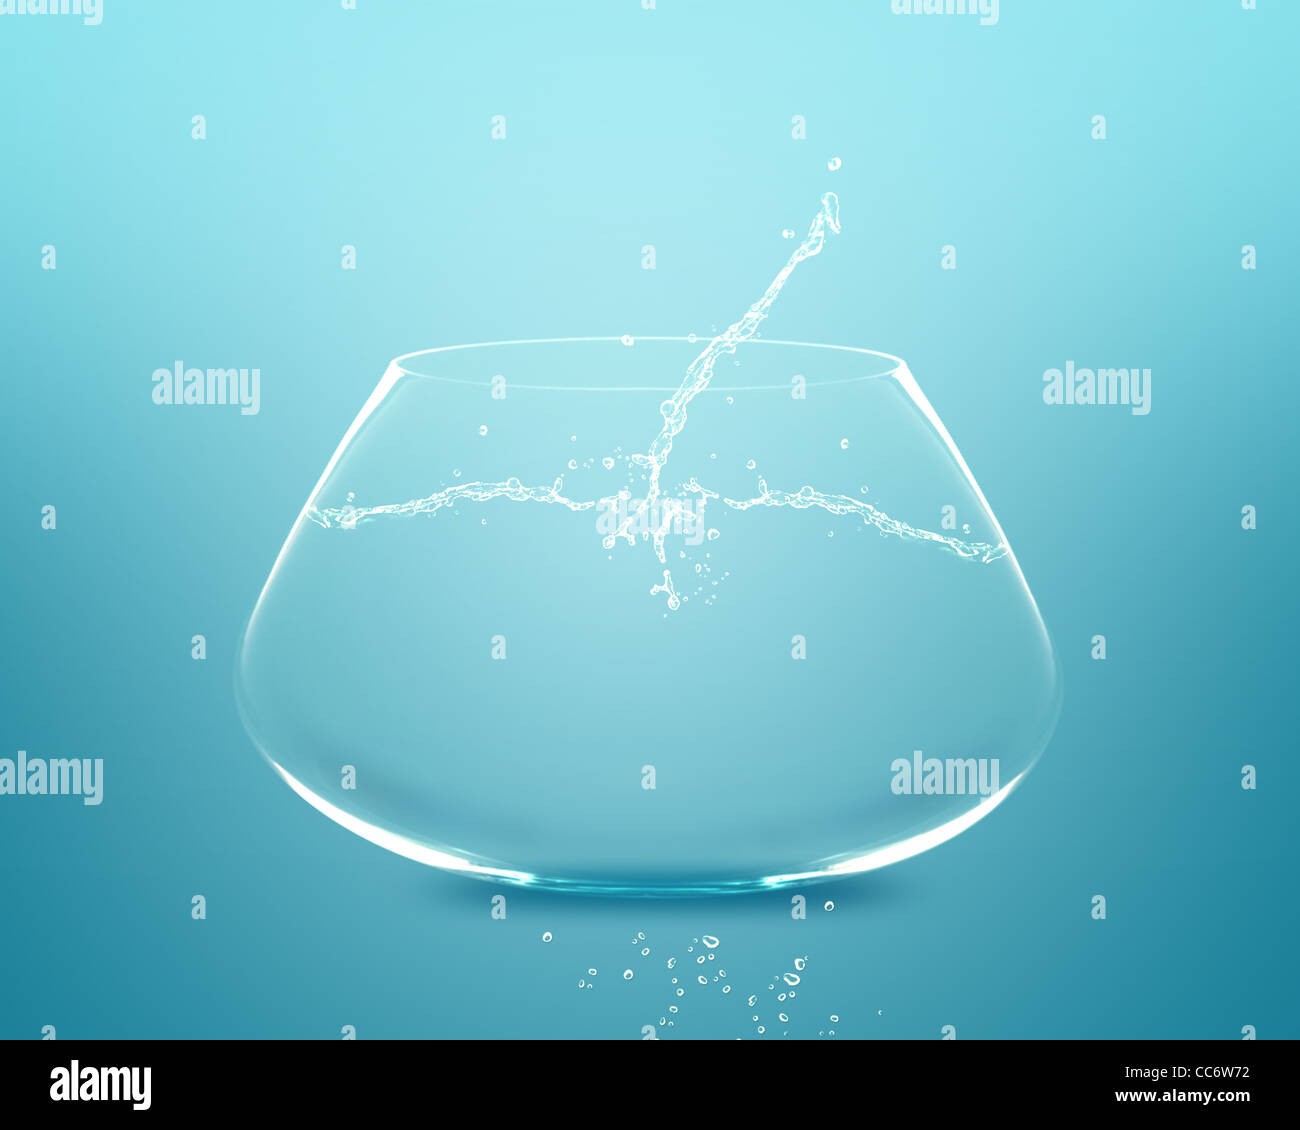 Fill up a fishbowl Stock Photo by ©rclassenlayouts 69421623